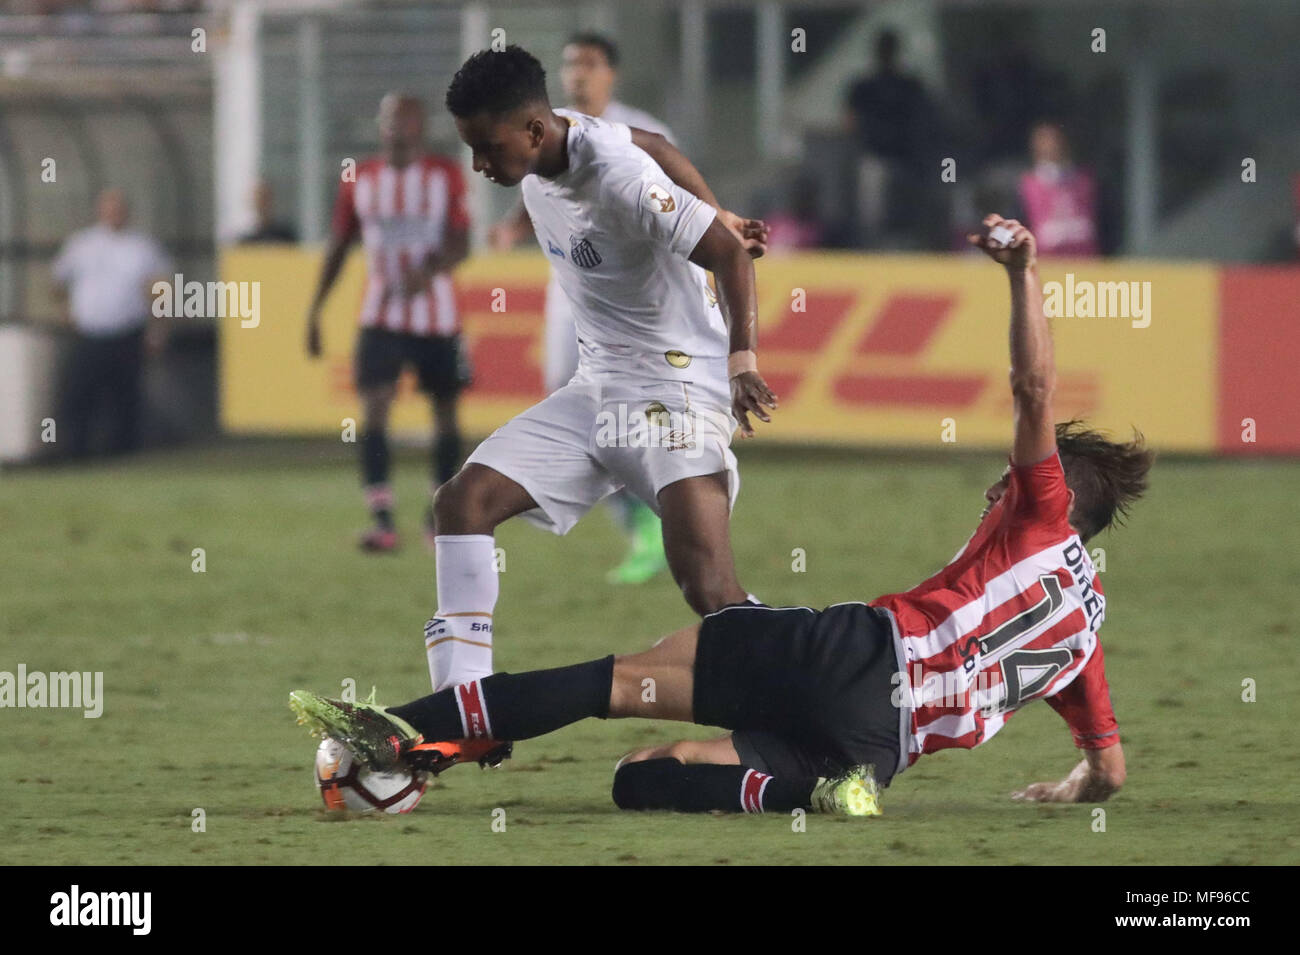 Santos, Brazil. 24th Apr, 2018. Rodrygo during the match between Santos and Estudiantes (Argentina) held at Vila Belmiro Stadium in Santos, SP. The match is valid for the 4th round of Group 6 of the 2018 Copa Libertadores. Credit: Ricardo Moreira/FotoArena/Alamy Live News Stock Photo